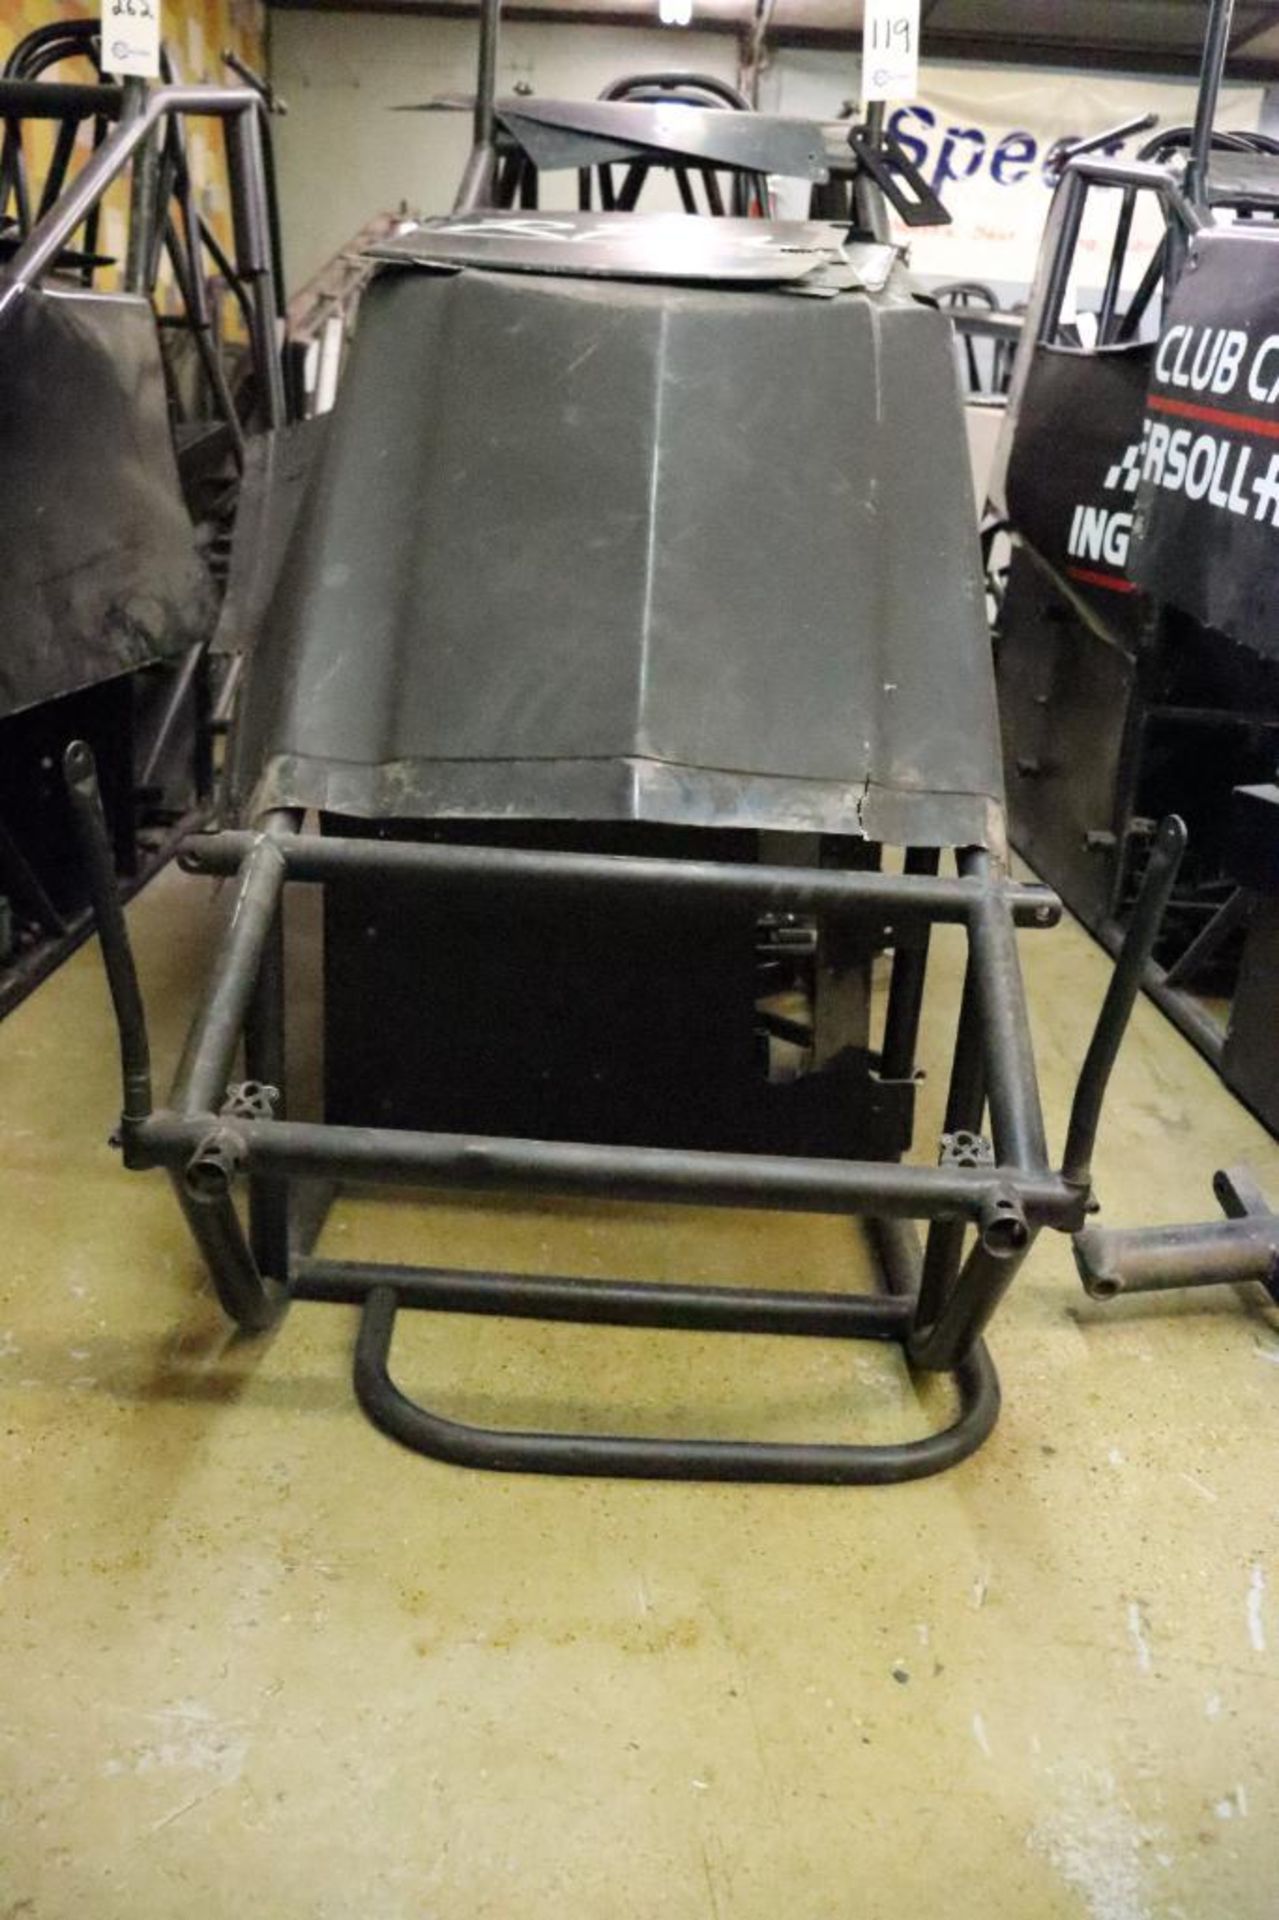 Smith Ingersoll-Rand sprint car w/ body panels & components - Image 25 of 27